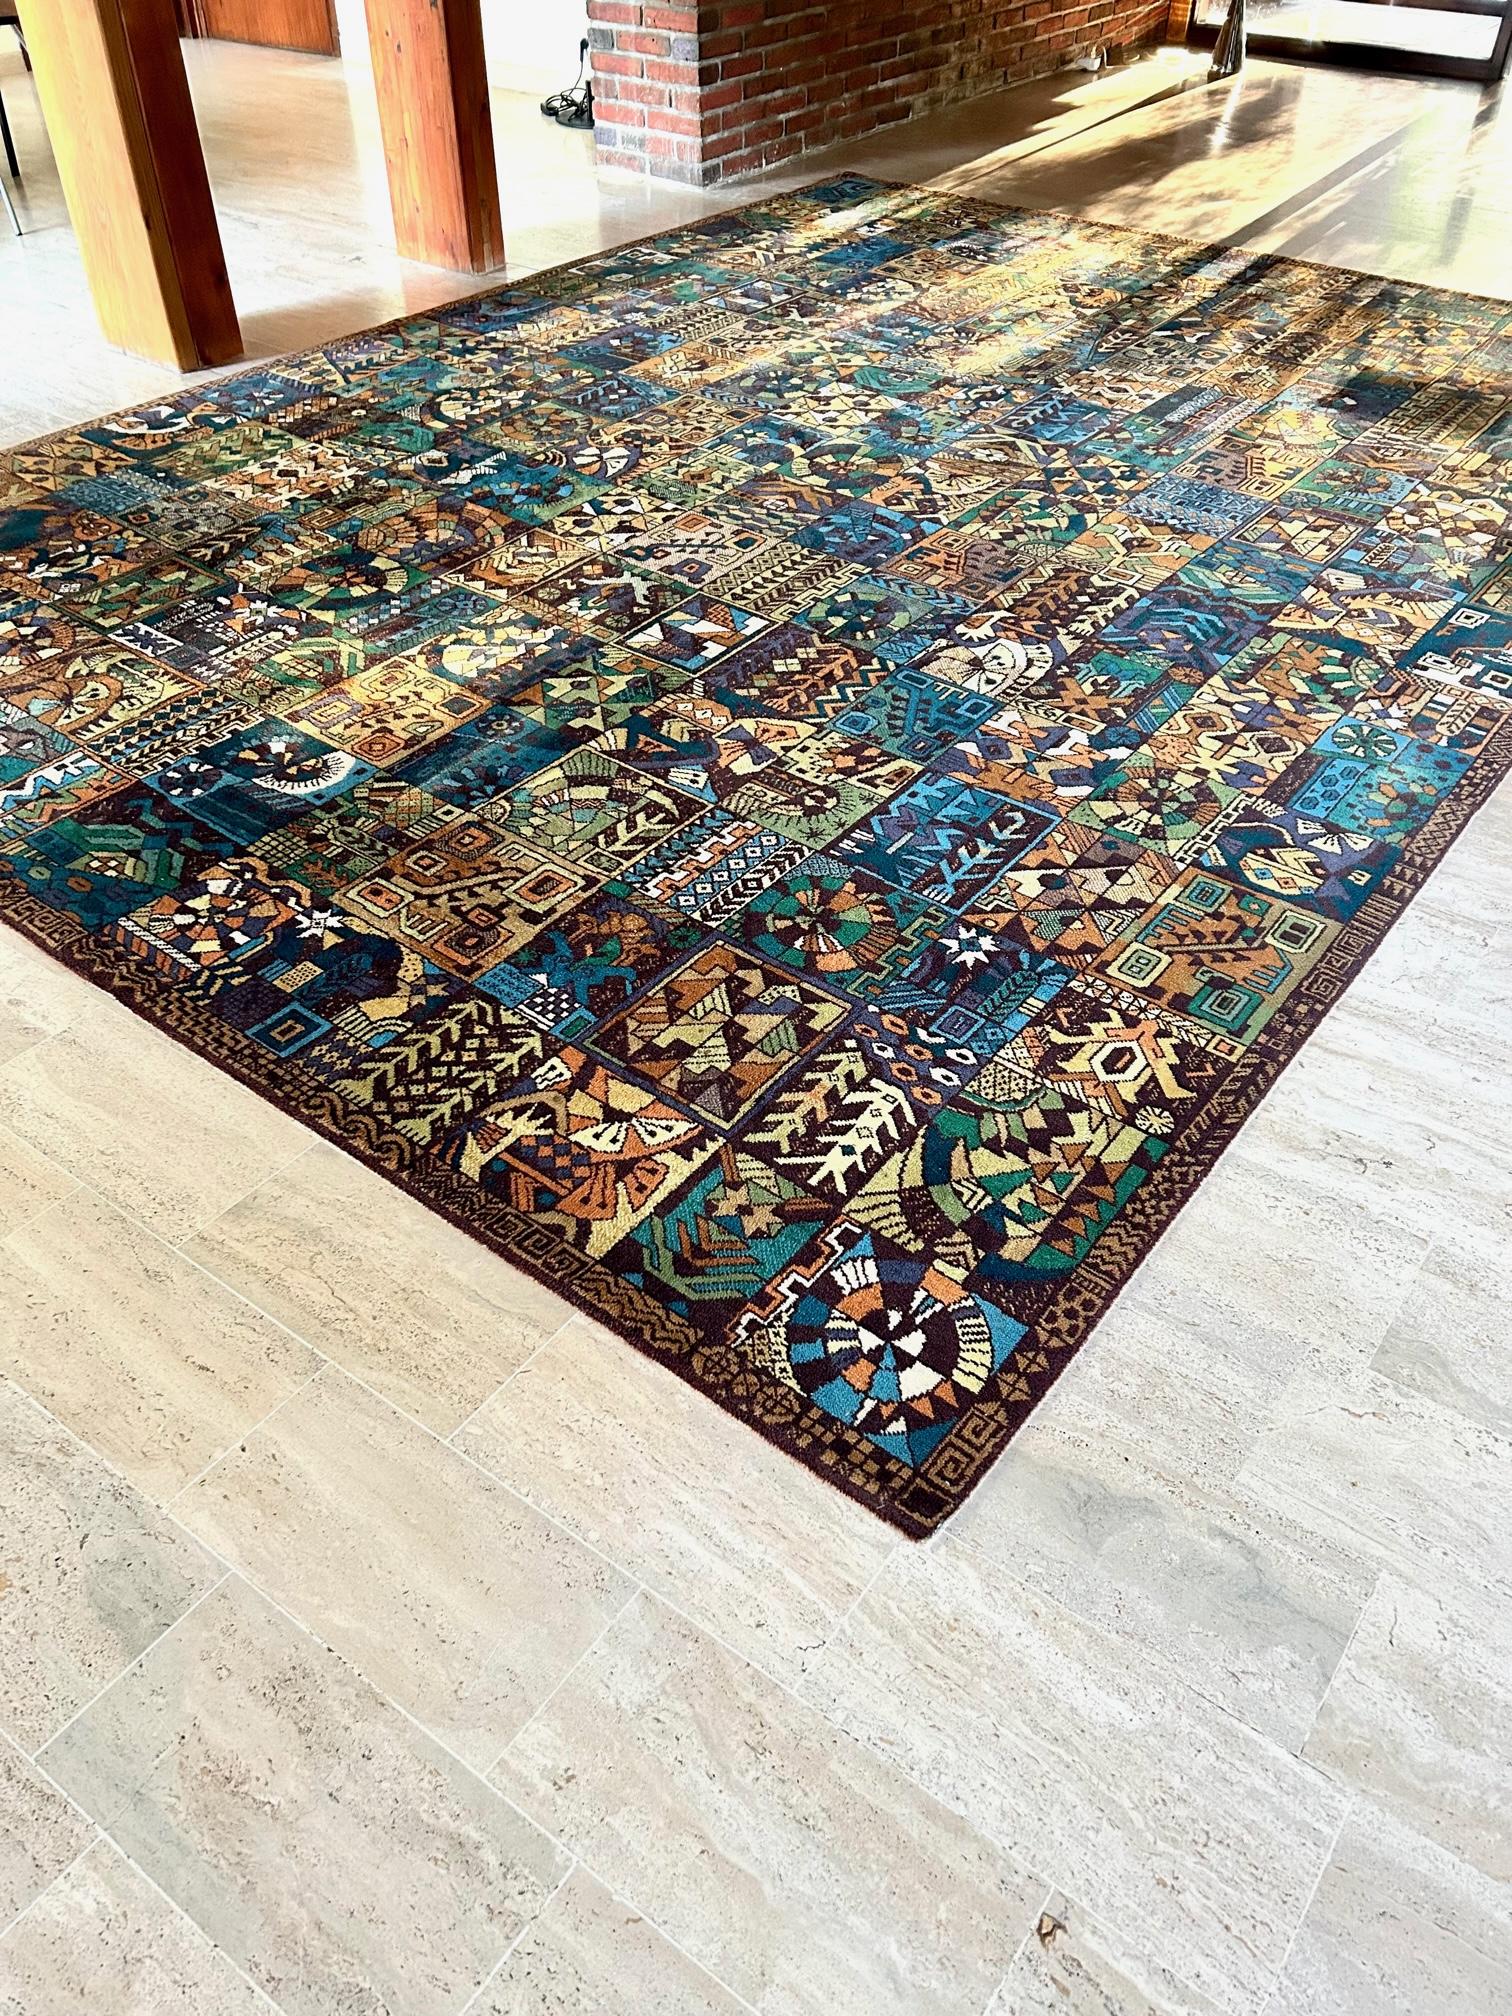 Large Collectible Artsite Parsa Rug produced by Vorwerk, Germany, 1960s
Mid century artist rug

Vintage 1960s
Materials: Wool
Width: 3 meters
Length: 4 meters
The carpet purchased in Germany a year ago, has been professionally cleaned and is in